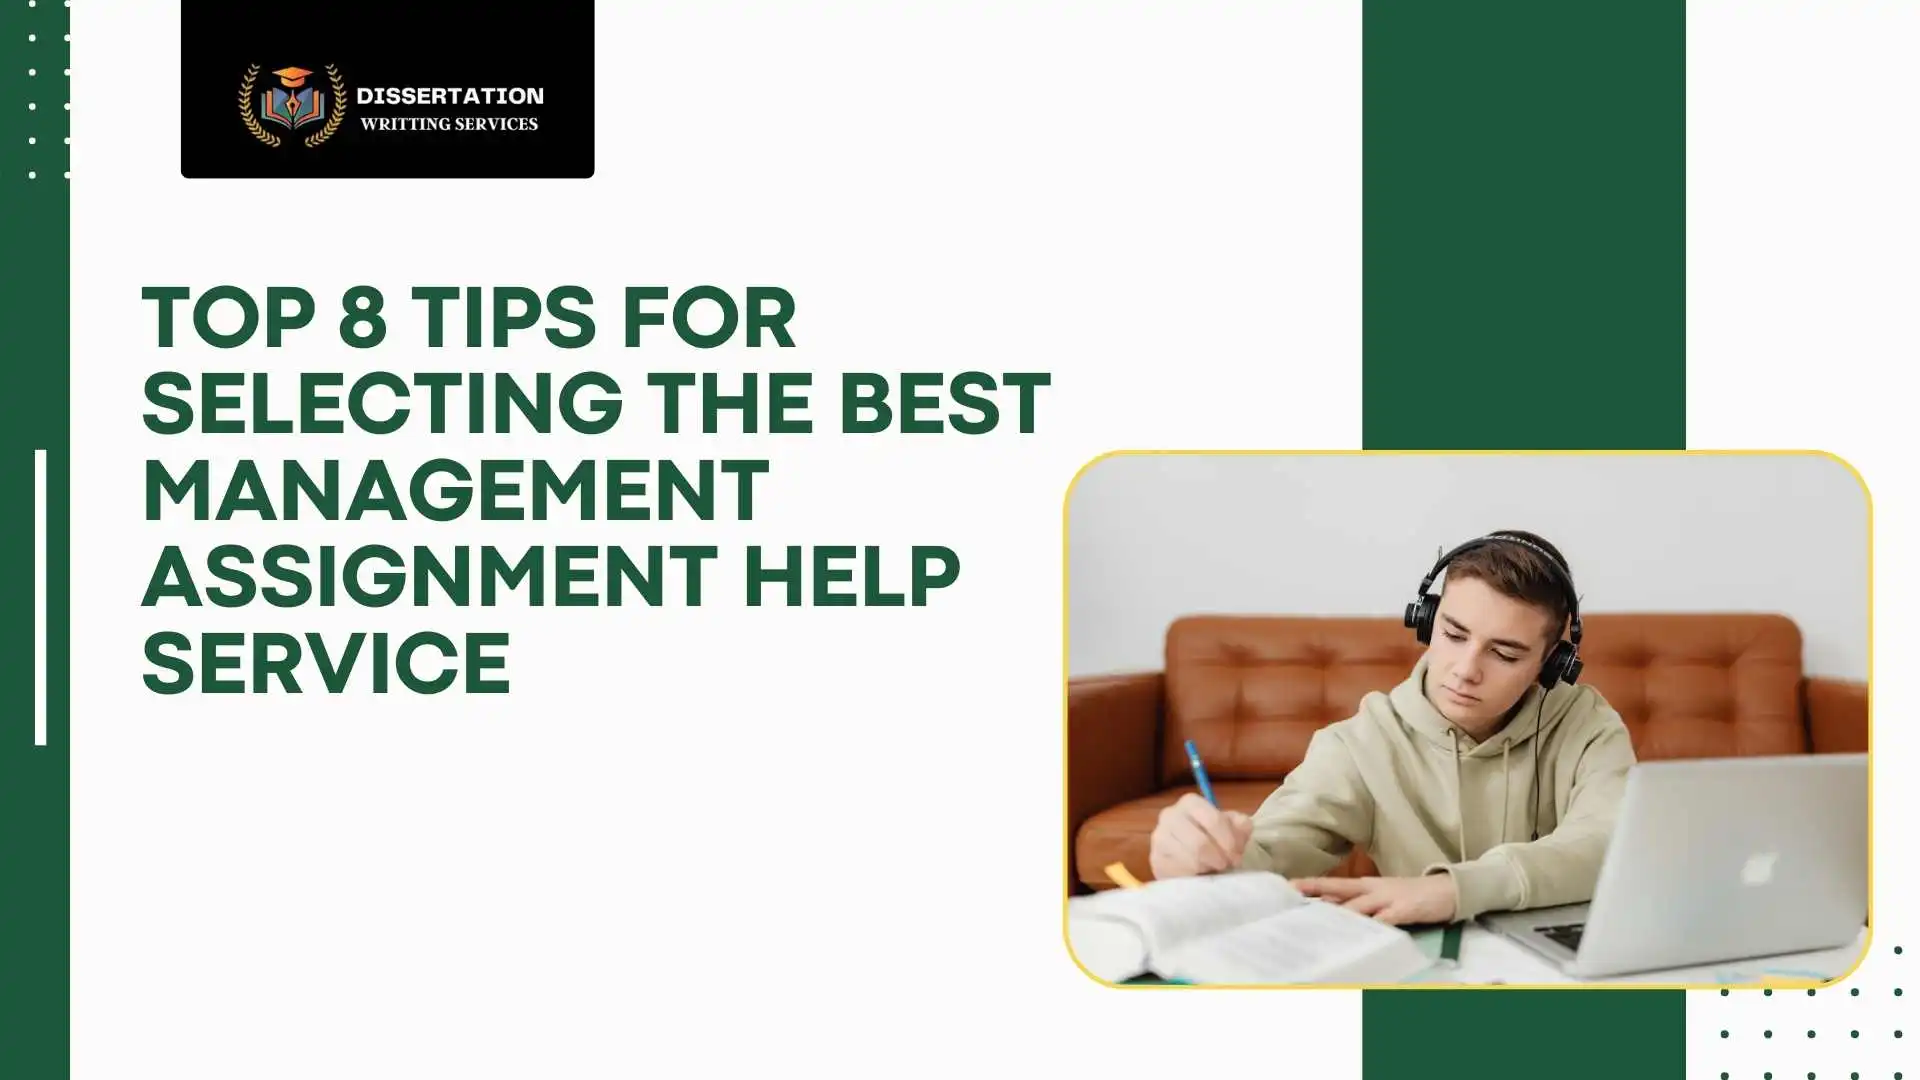 Top 8 Tips for Selecting the Best Management Assignment Help Service